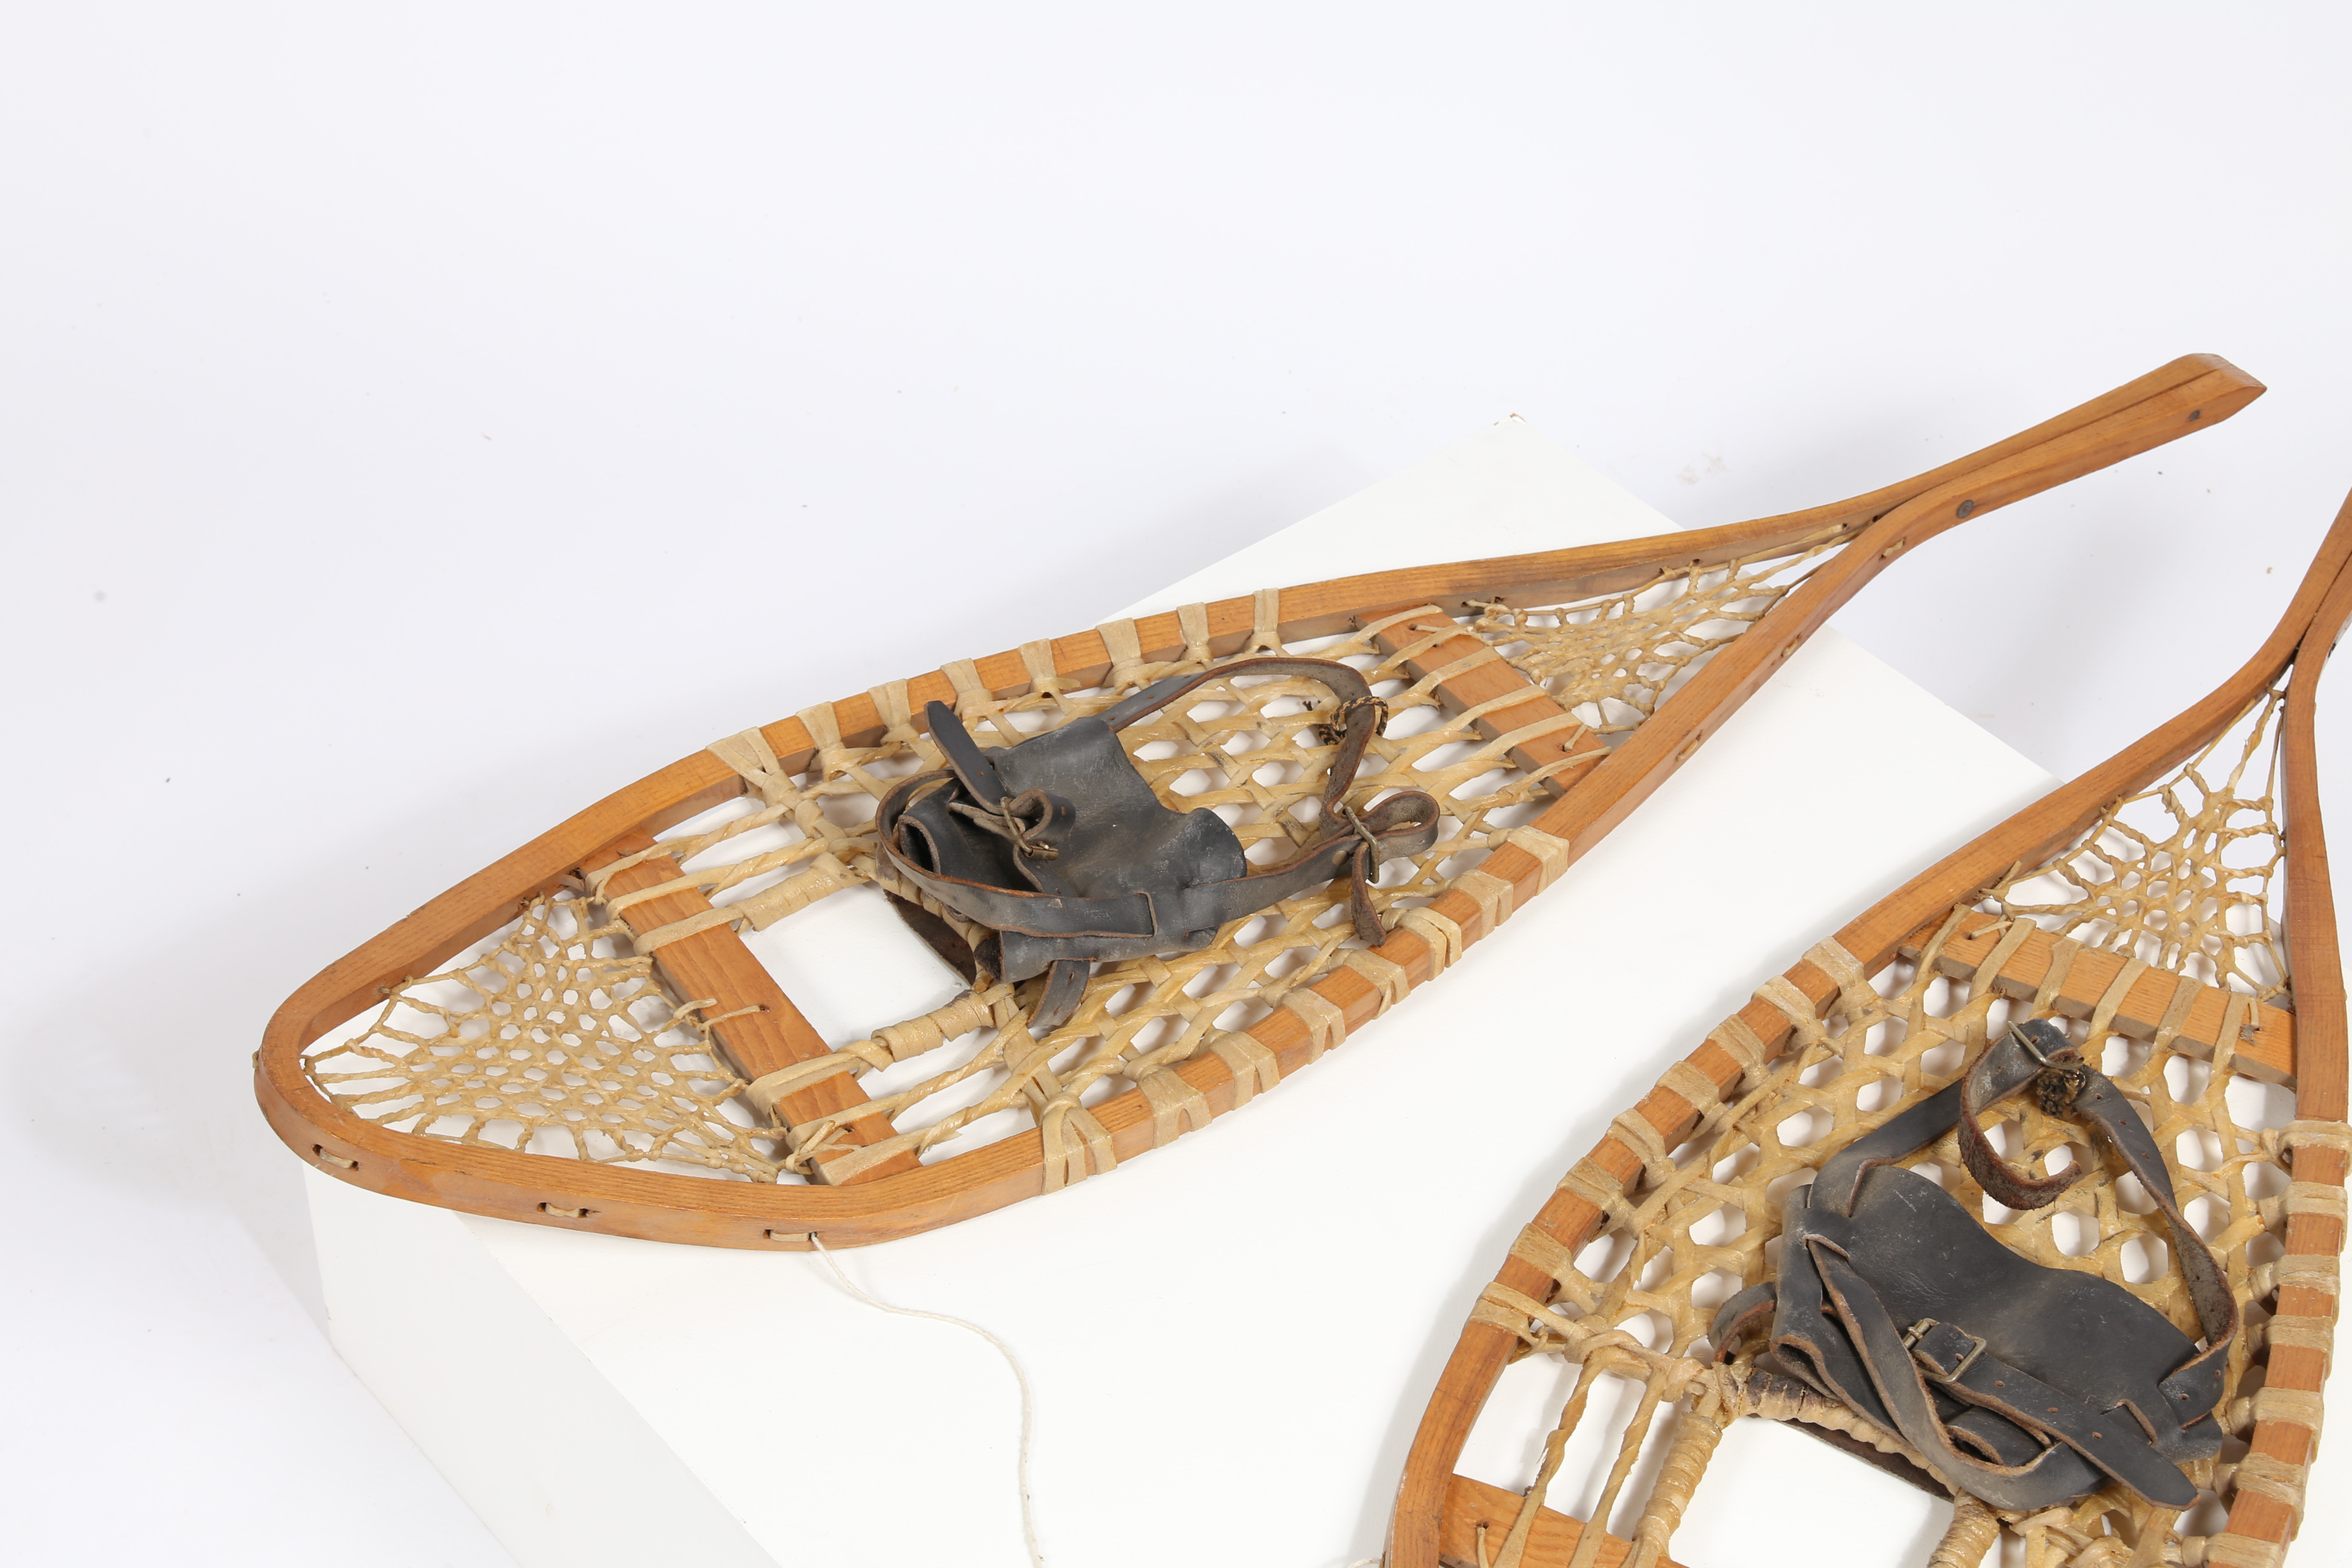 A PAIR OF EARLY 20TH CENTURY PINE RACKET SHAPED SNOW SHOES. - Image 3 of 7